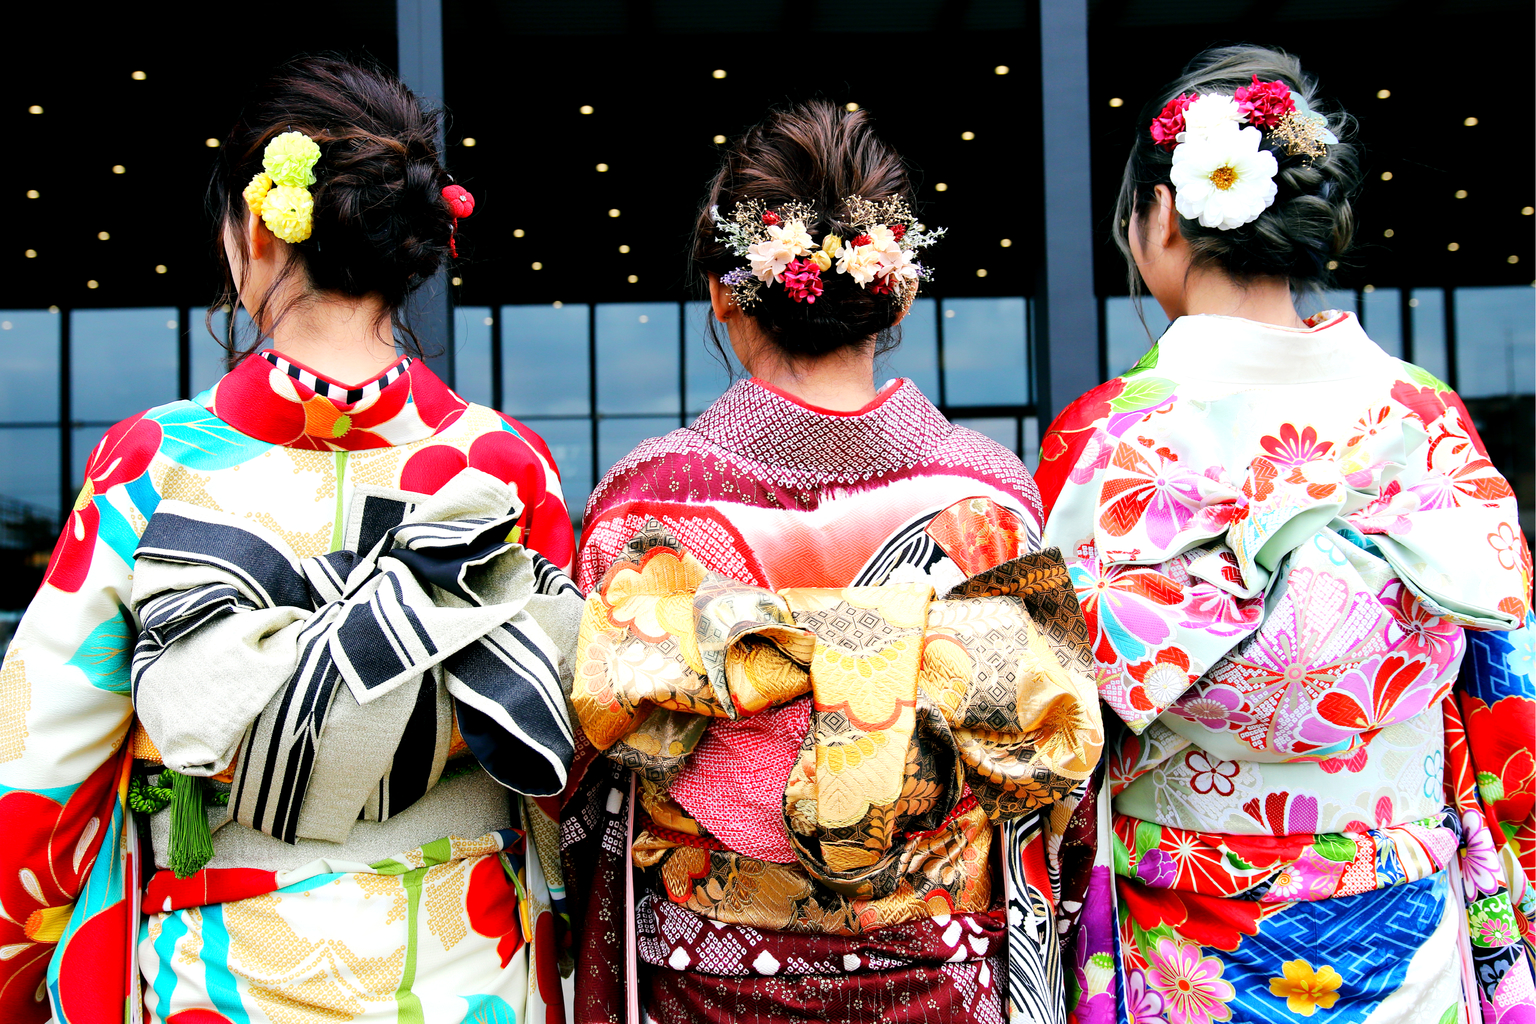 Japanese Holidays: What is “Seijin no Hi” (Coming of Age Day)?